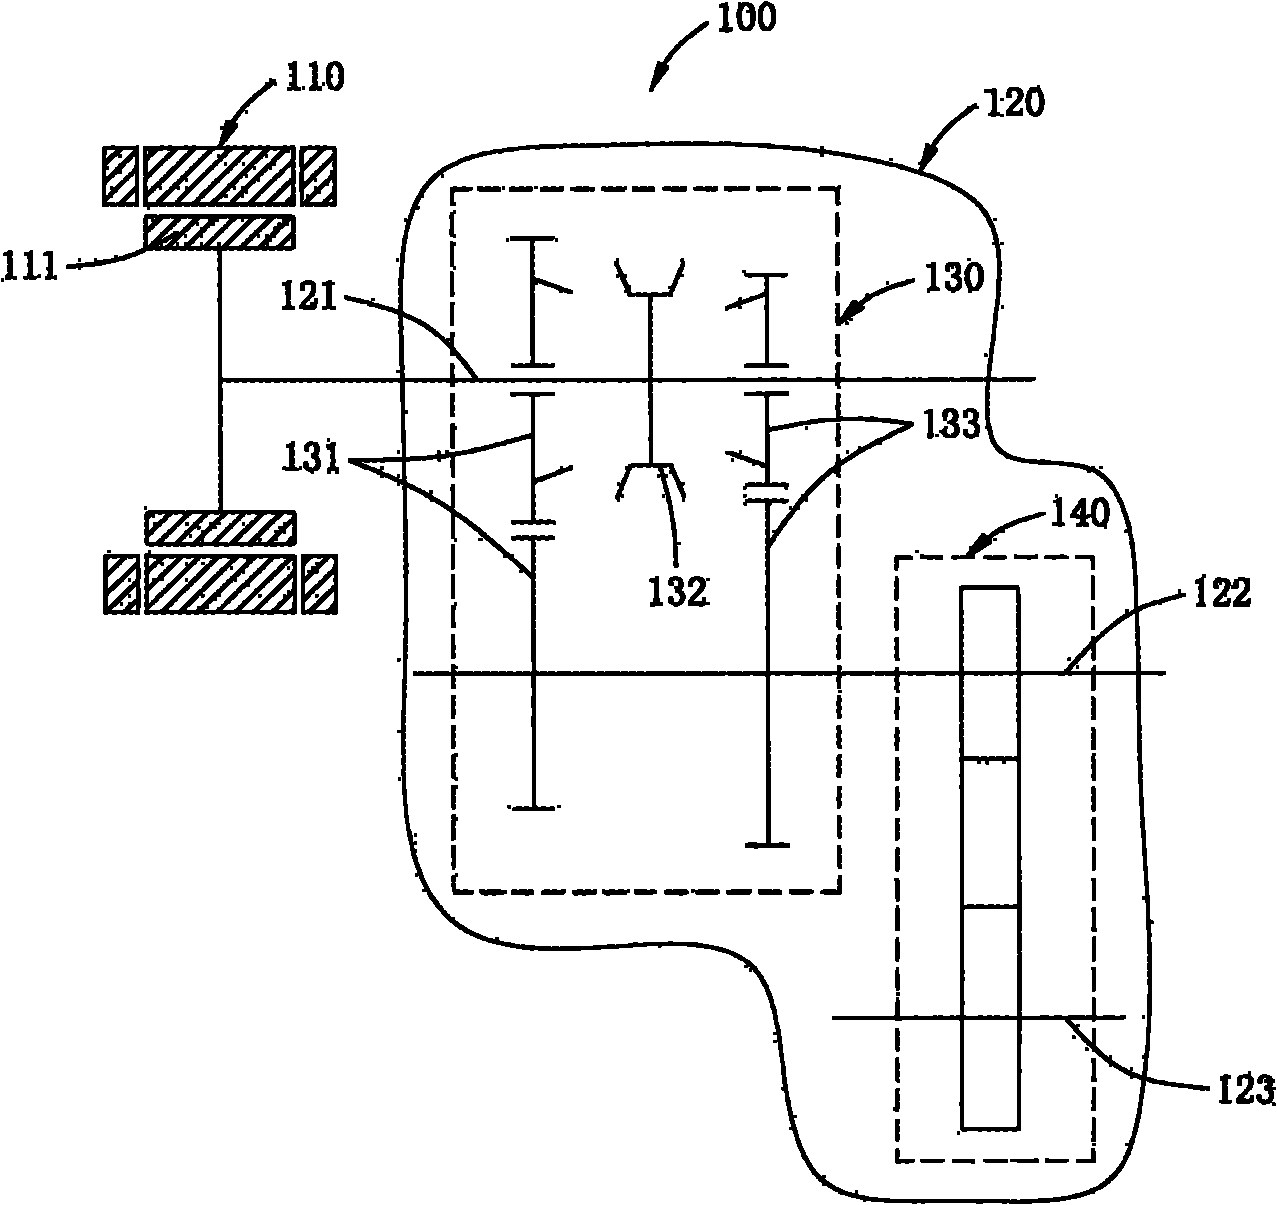 Electrically-driven speed change device for vehicles